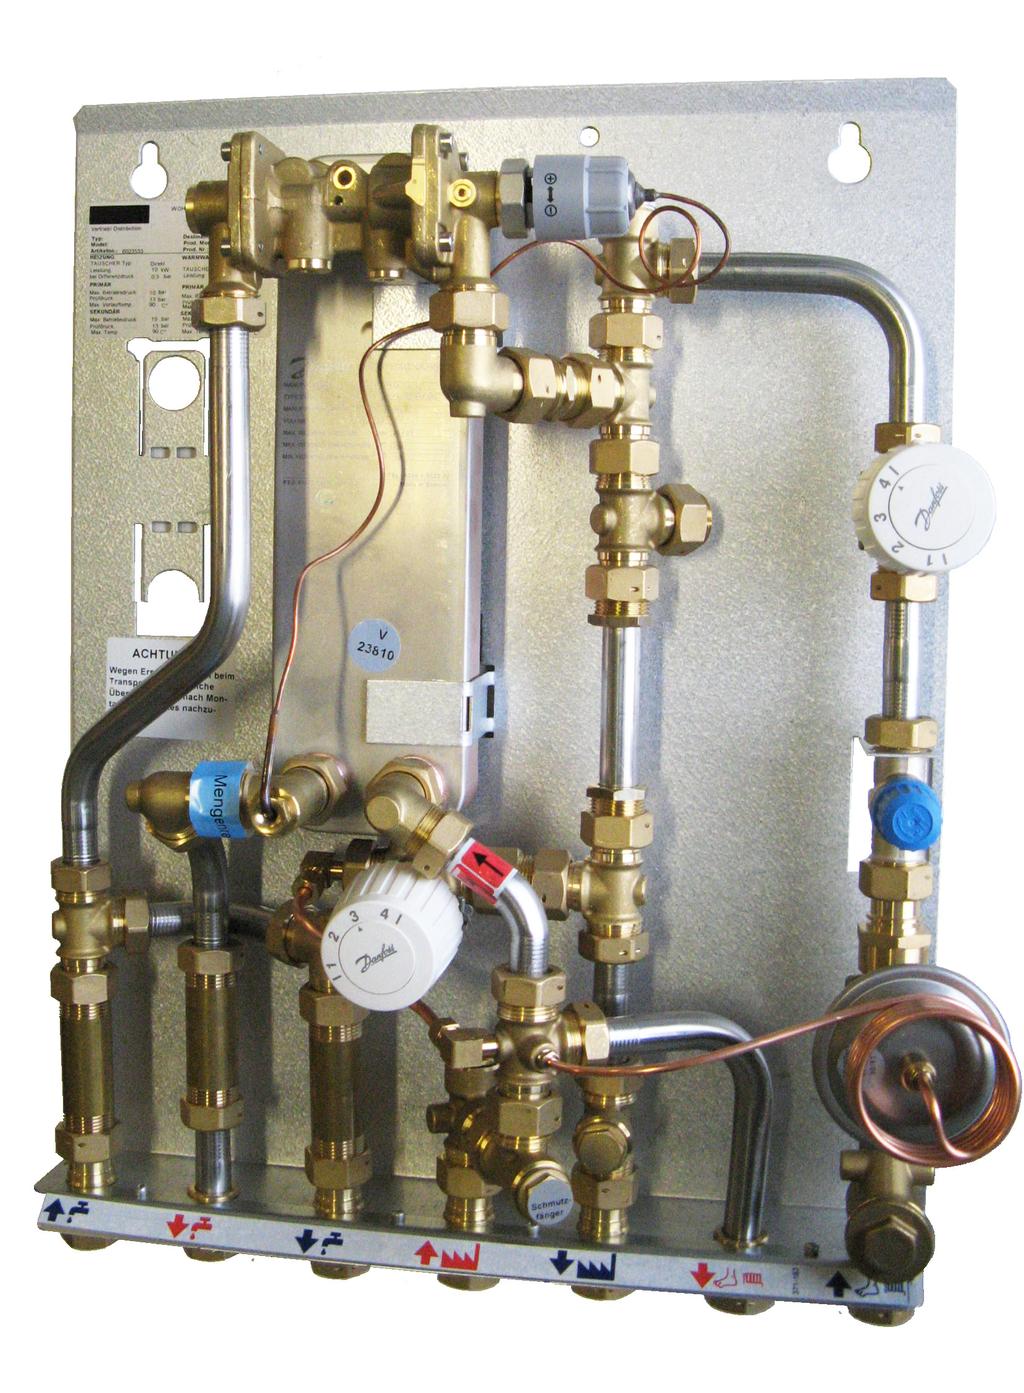 5.3 (with bypass thermostat mounted after heat meter) - Type 004U8044 DHW DCW DCW 2 Plate heat exchanger, DHW 4 Differential pressure controller 5 Dirt strainer 5A Dirt strainer with plug ½ 6